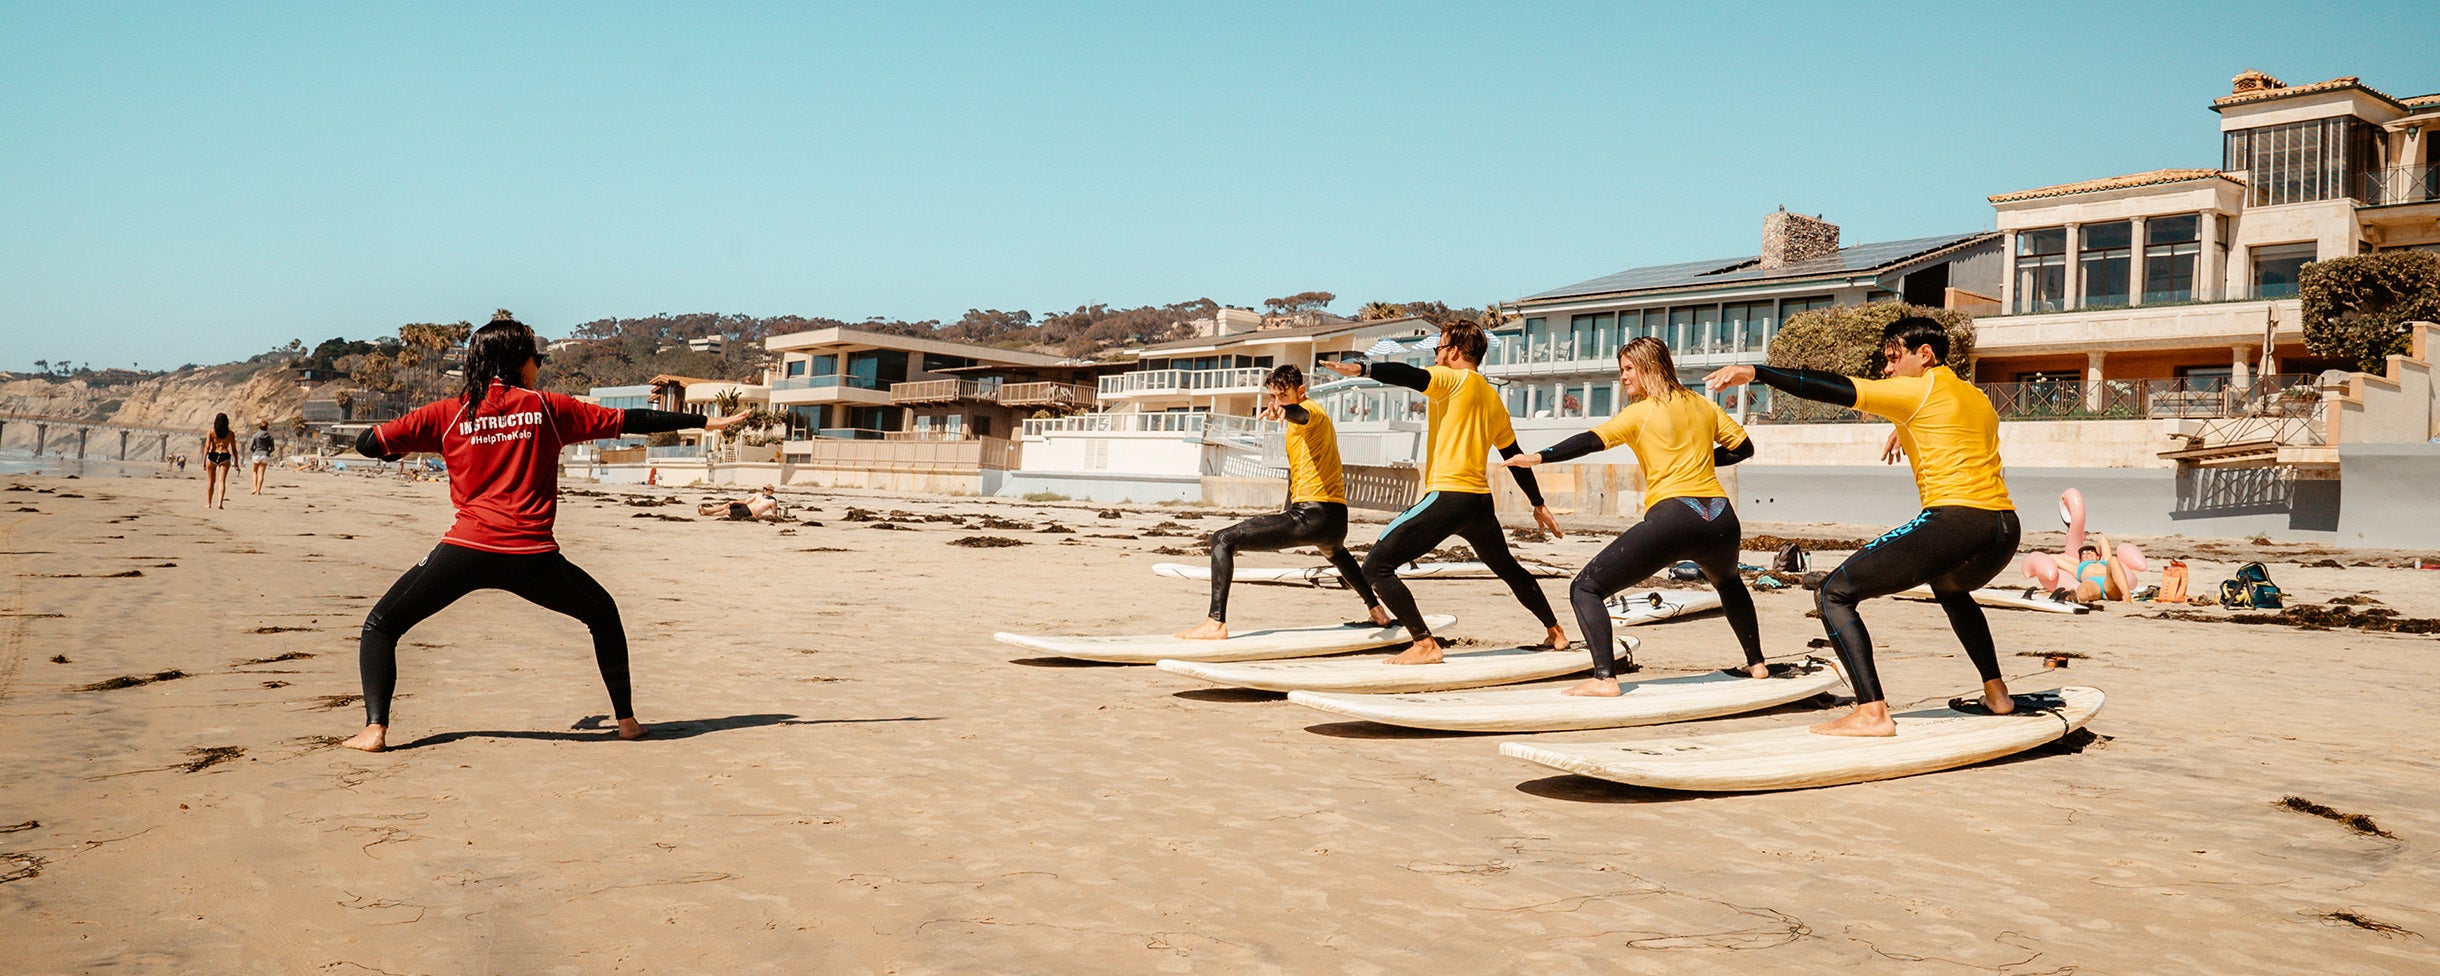 A group getting ready for the water practicing pop-ups on their board in La Jolla, California with a private surfing lesson with Everyday California.